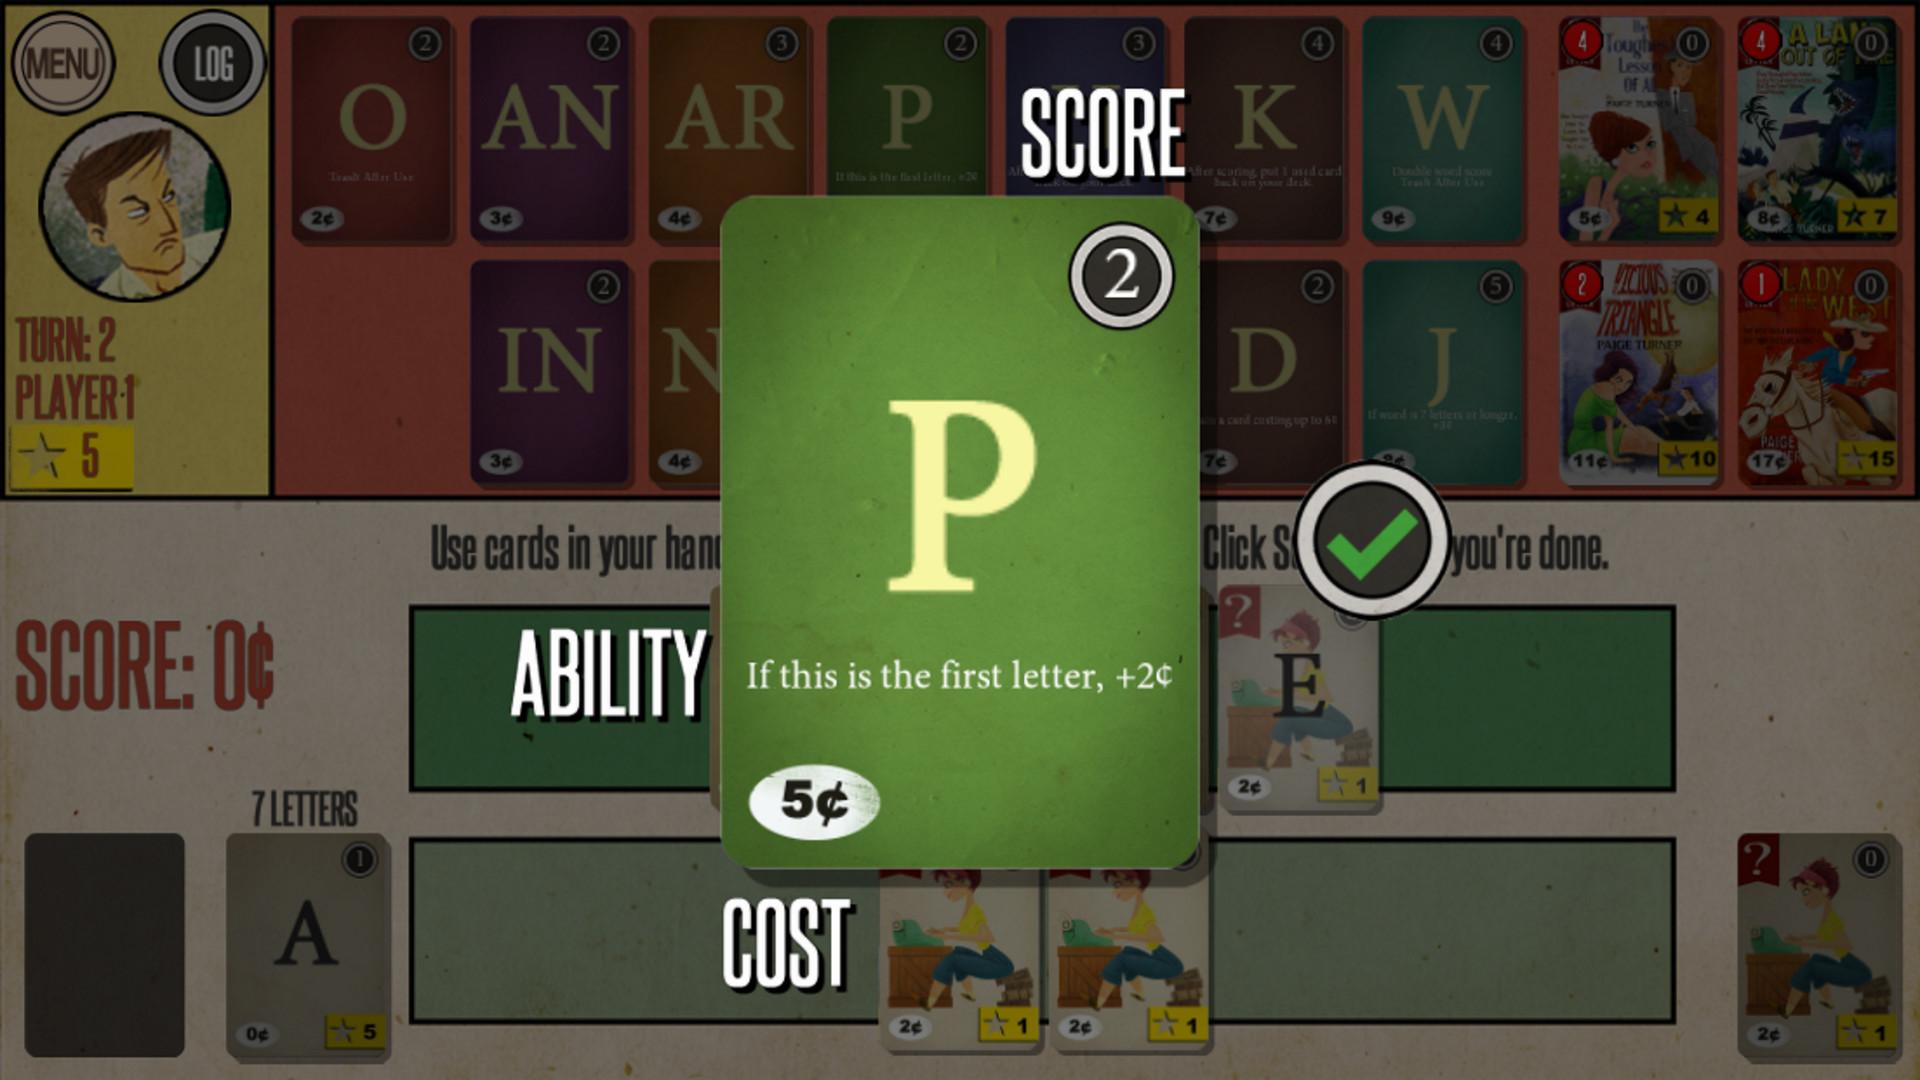 Screenshot №1 from game Paperback: The Game